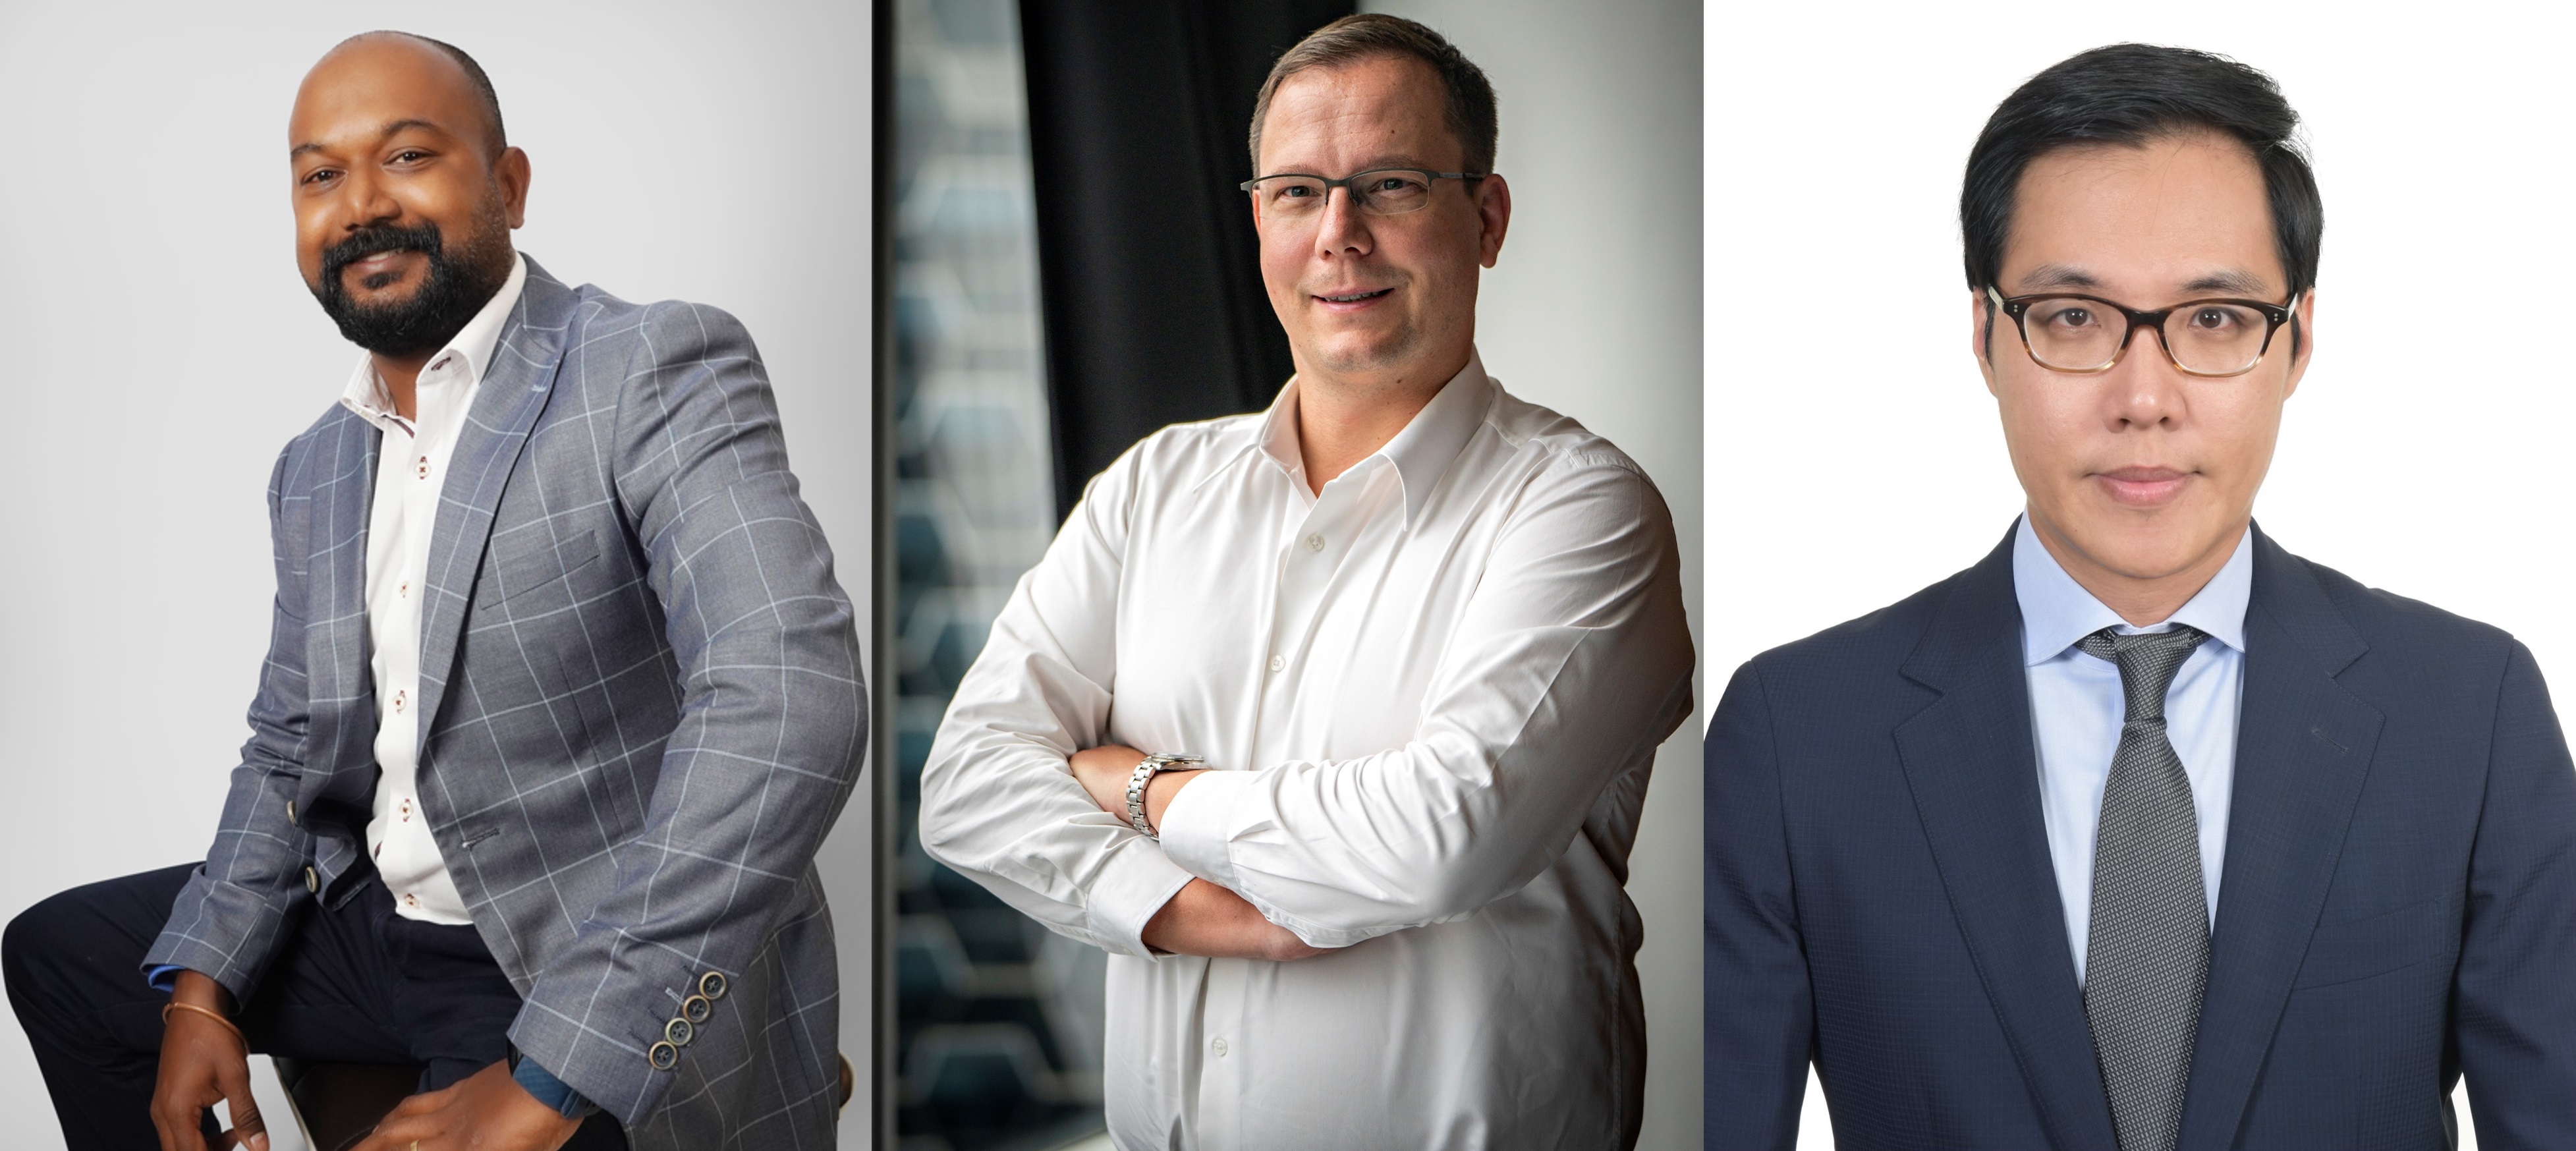 DHL Supply Chain strengthens leadership team with new key appointments in Asia Pacific